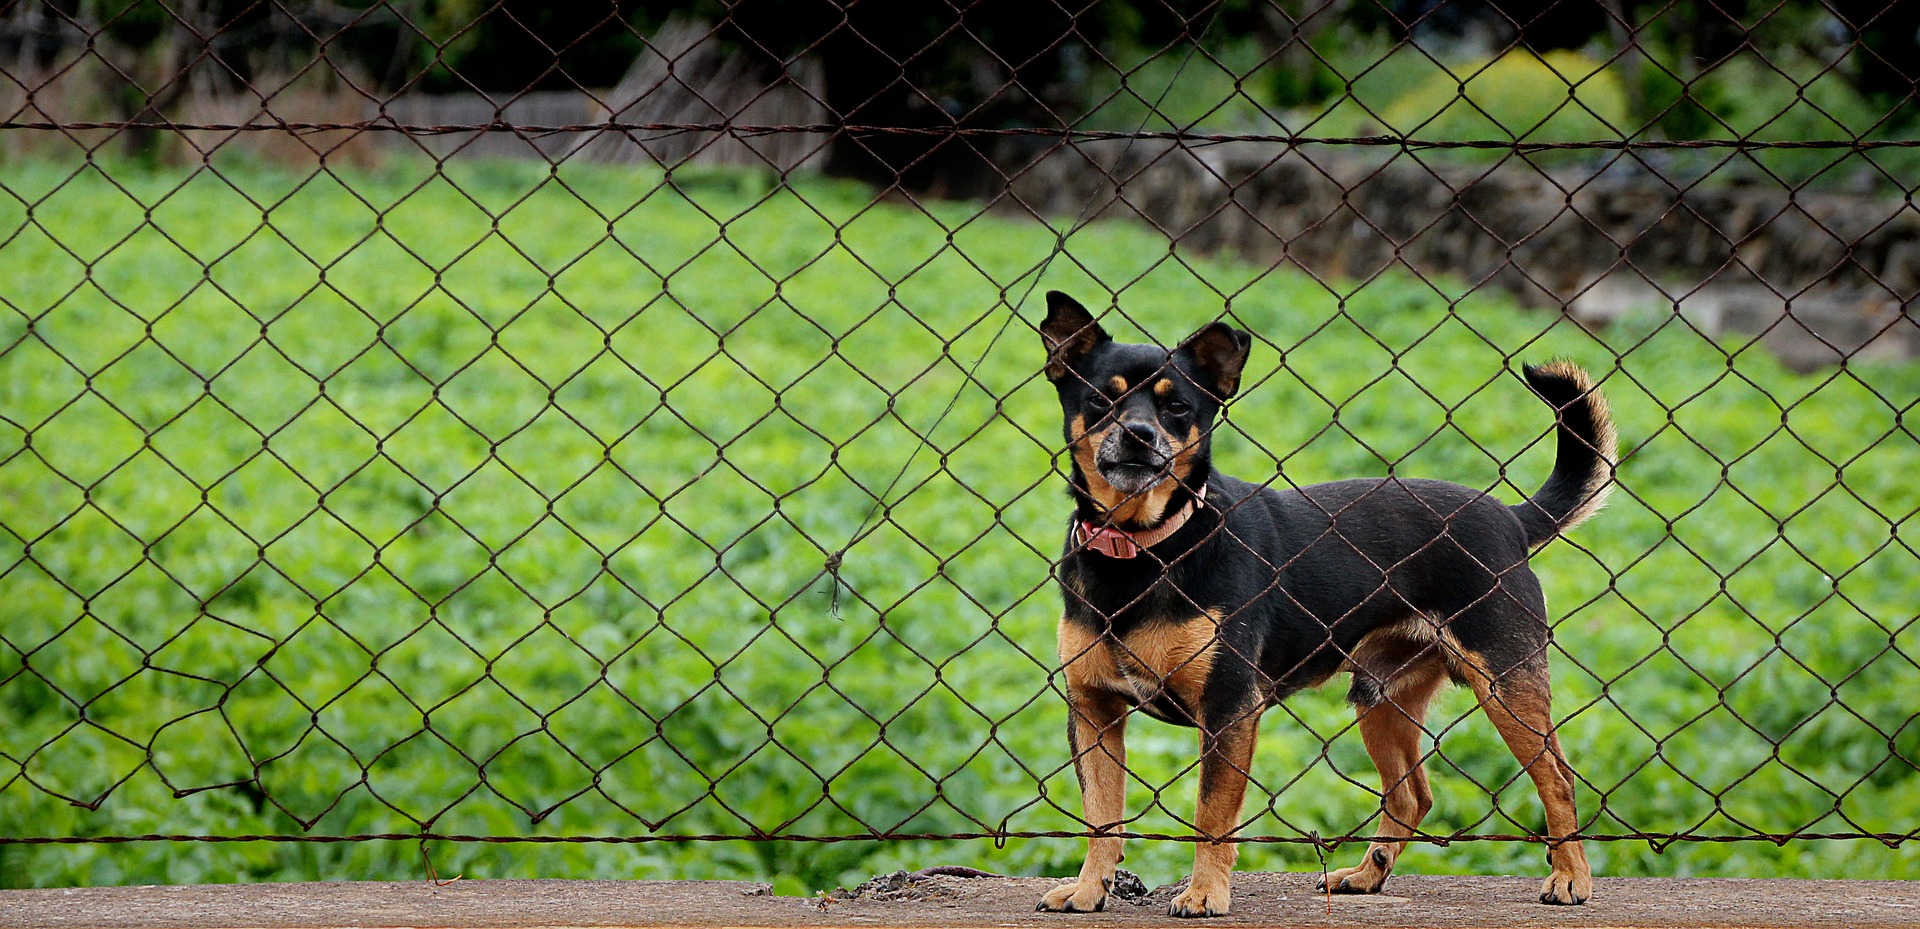 Dog looking out through wire fencing